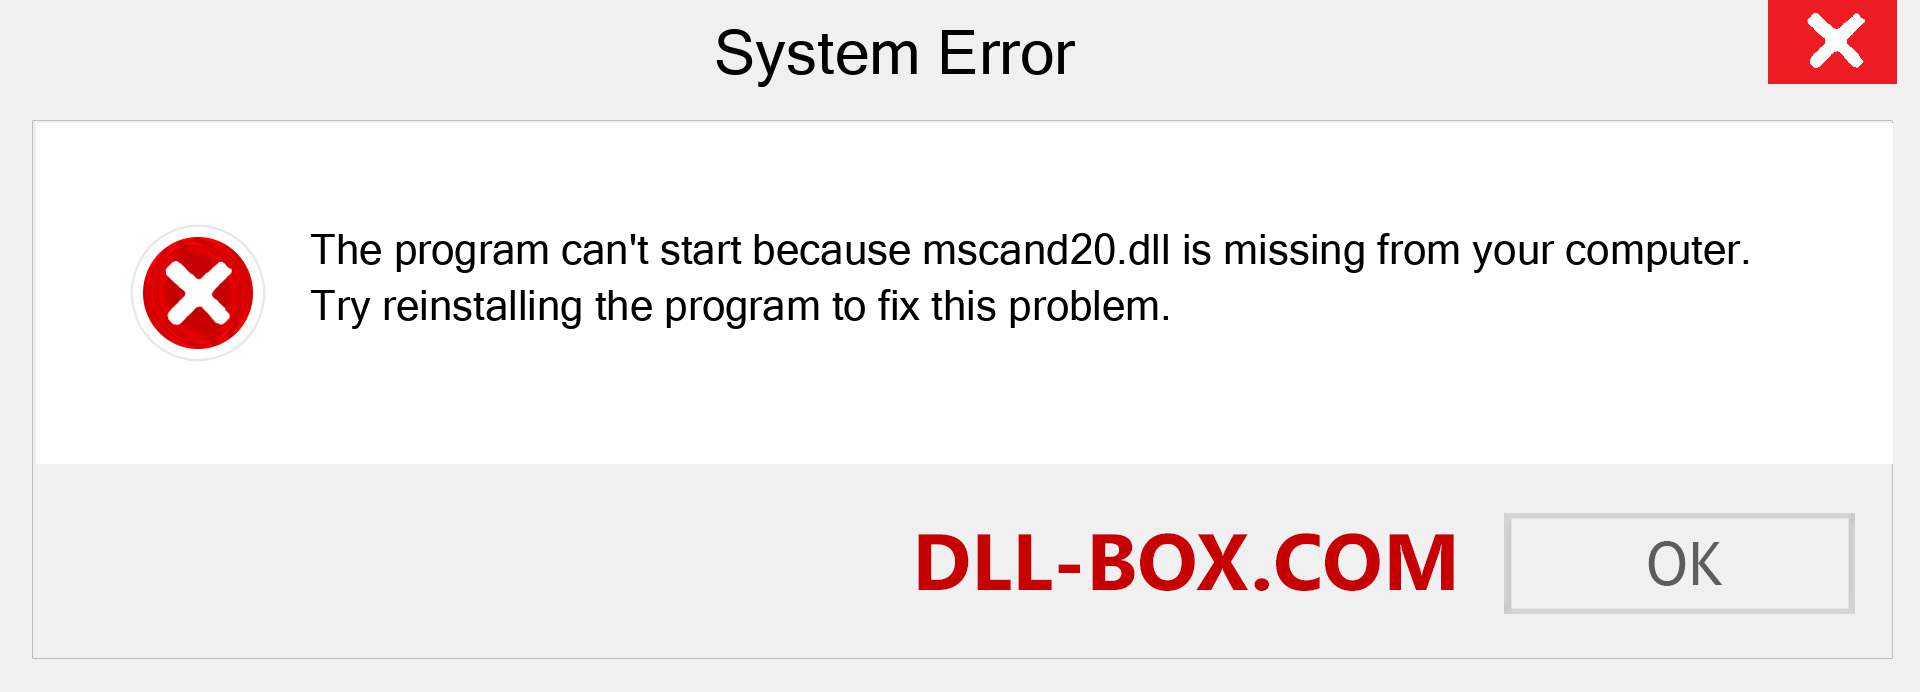  mscand20.dll file is missing?. Download for Windows 7, 8, 10 - Fix  mscand20 dll Missing Error on Windows, photos, images